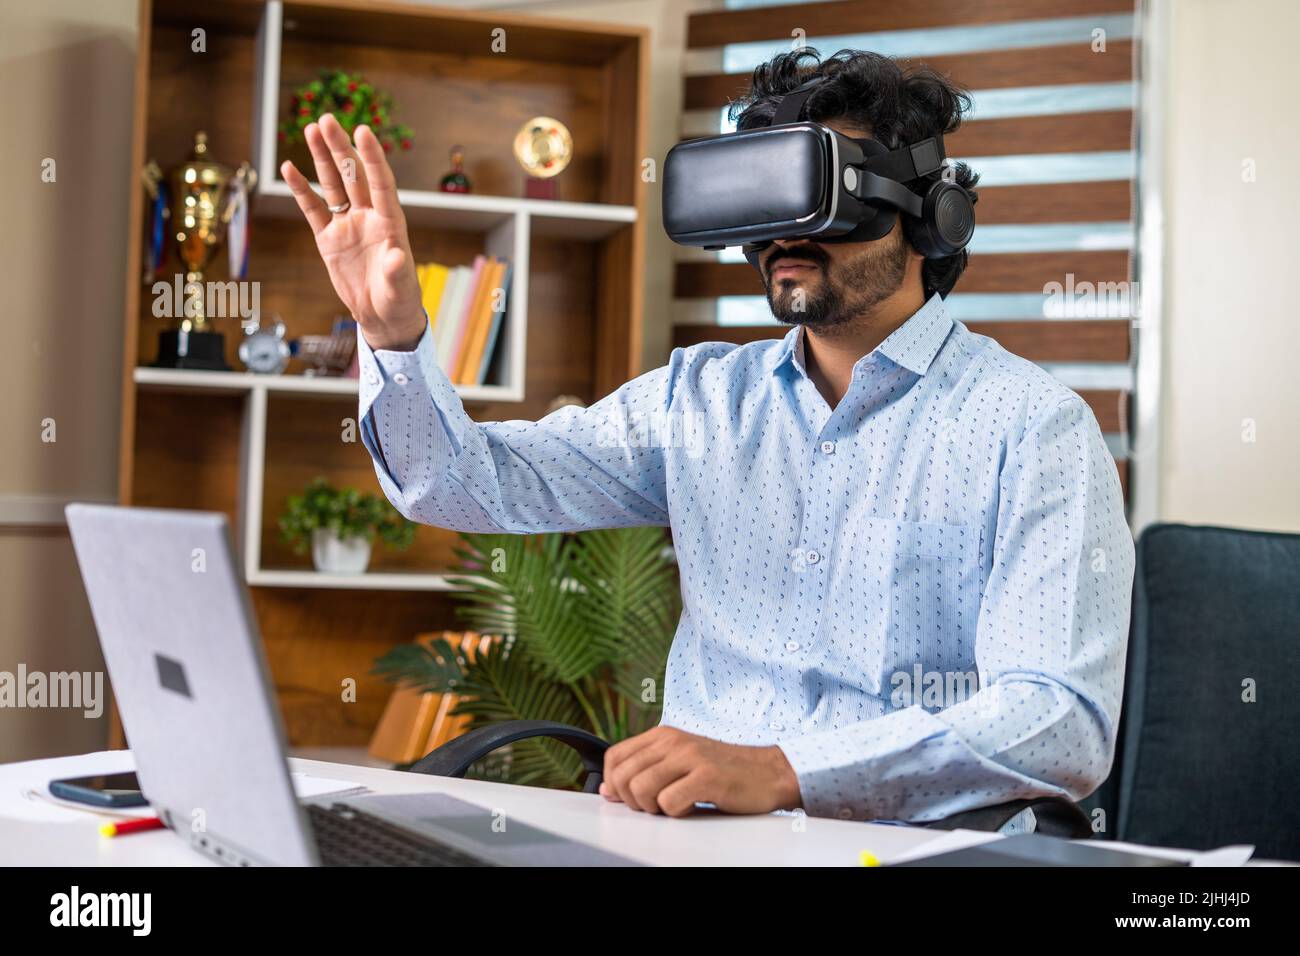 young businessman busy using VR or virtual reality headset for meeting at office with hand gestures - concept of technology, metaverse and futuristic Stock Photo